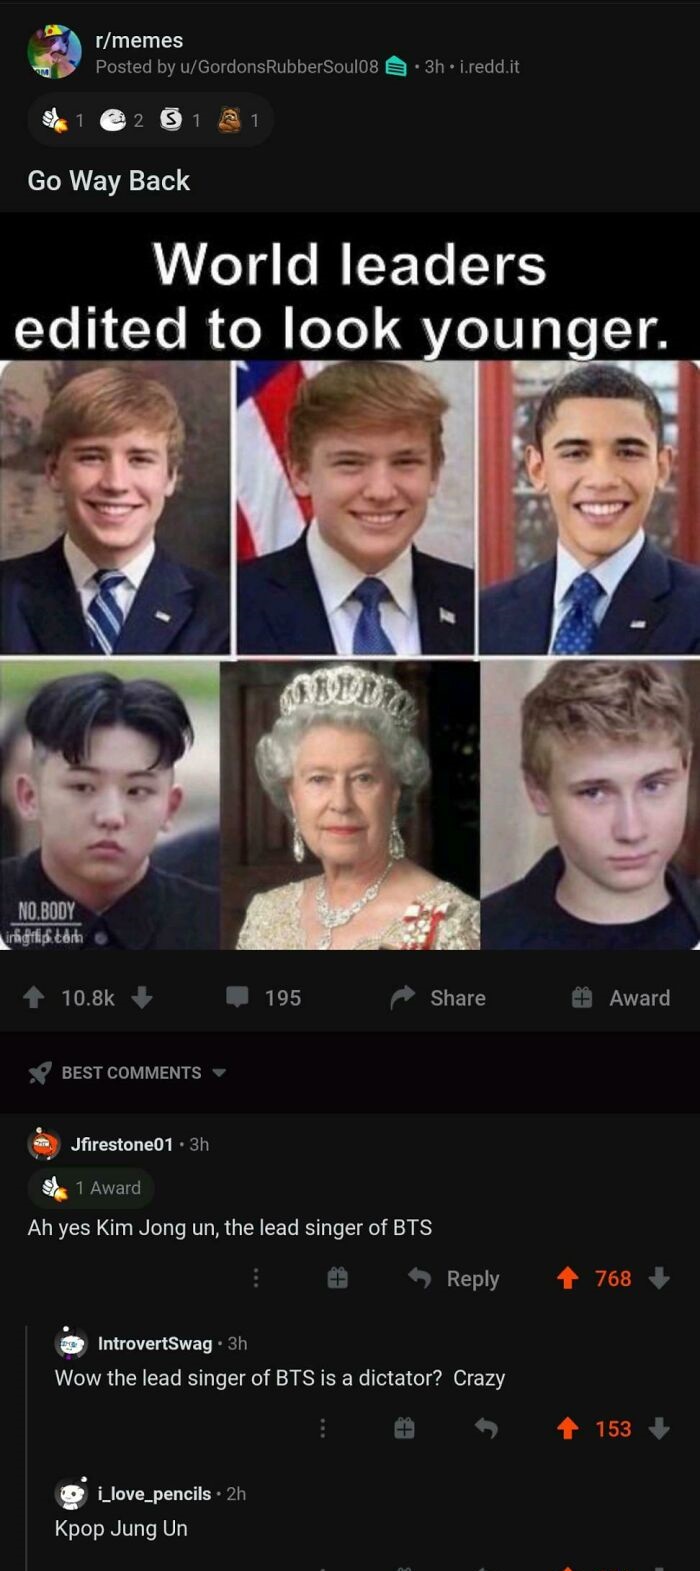 queen elizabeth ii - rmemes Posted by uGordons Rubber Soul08 . 3h. i.reddit 251 21 Go Way Back World leaders edited to look younger. No.Body imgis.tah 195 Award Best Jfirestone01 . 3h 1 Award Ah yes Kim Jong un, the lead singer of Bts 768 IntrovertSwag. 3